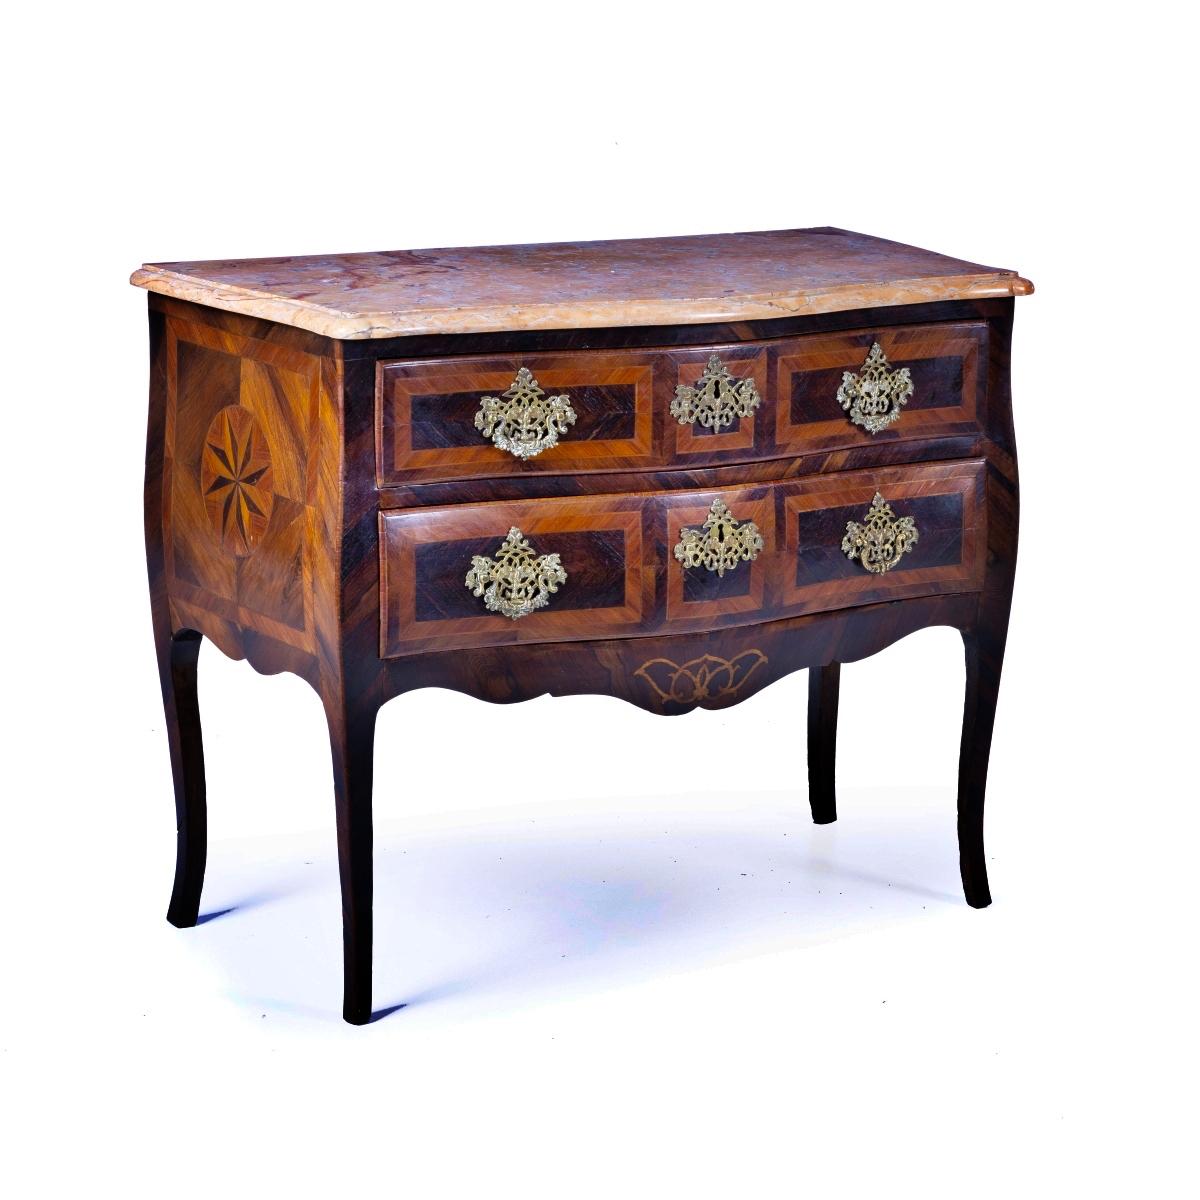 Hand-Crafted Portuguese Dresser 18th Century, Veneered in Brazilian Rosewood